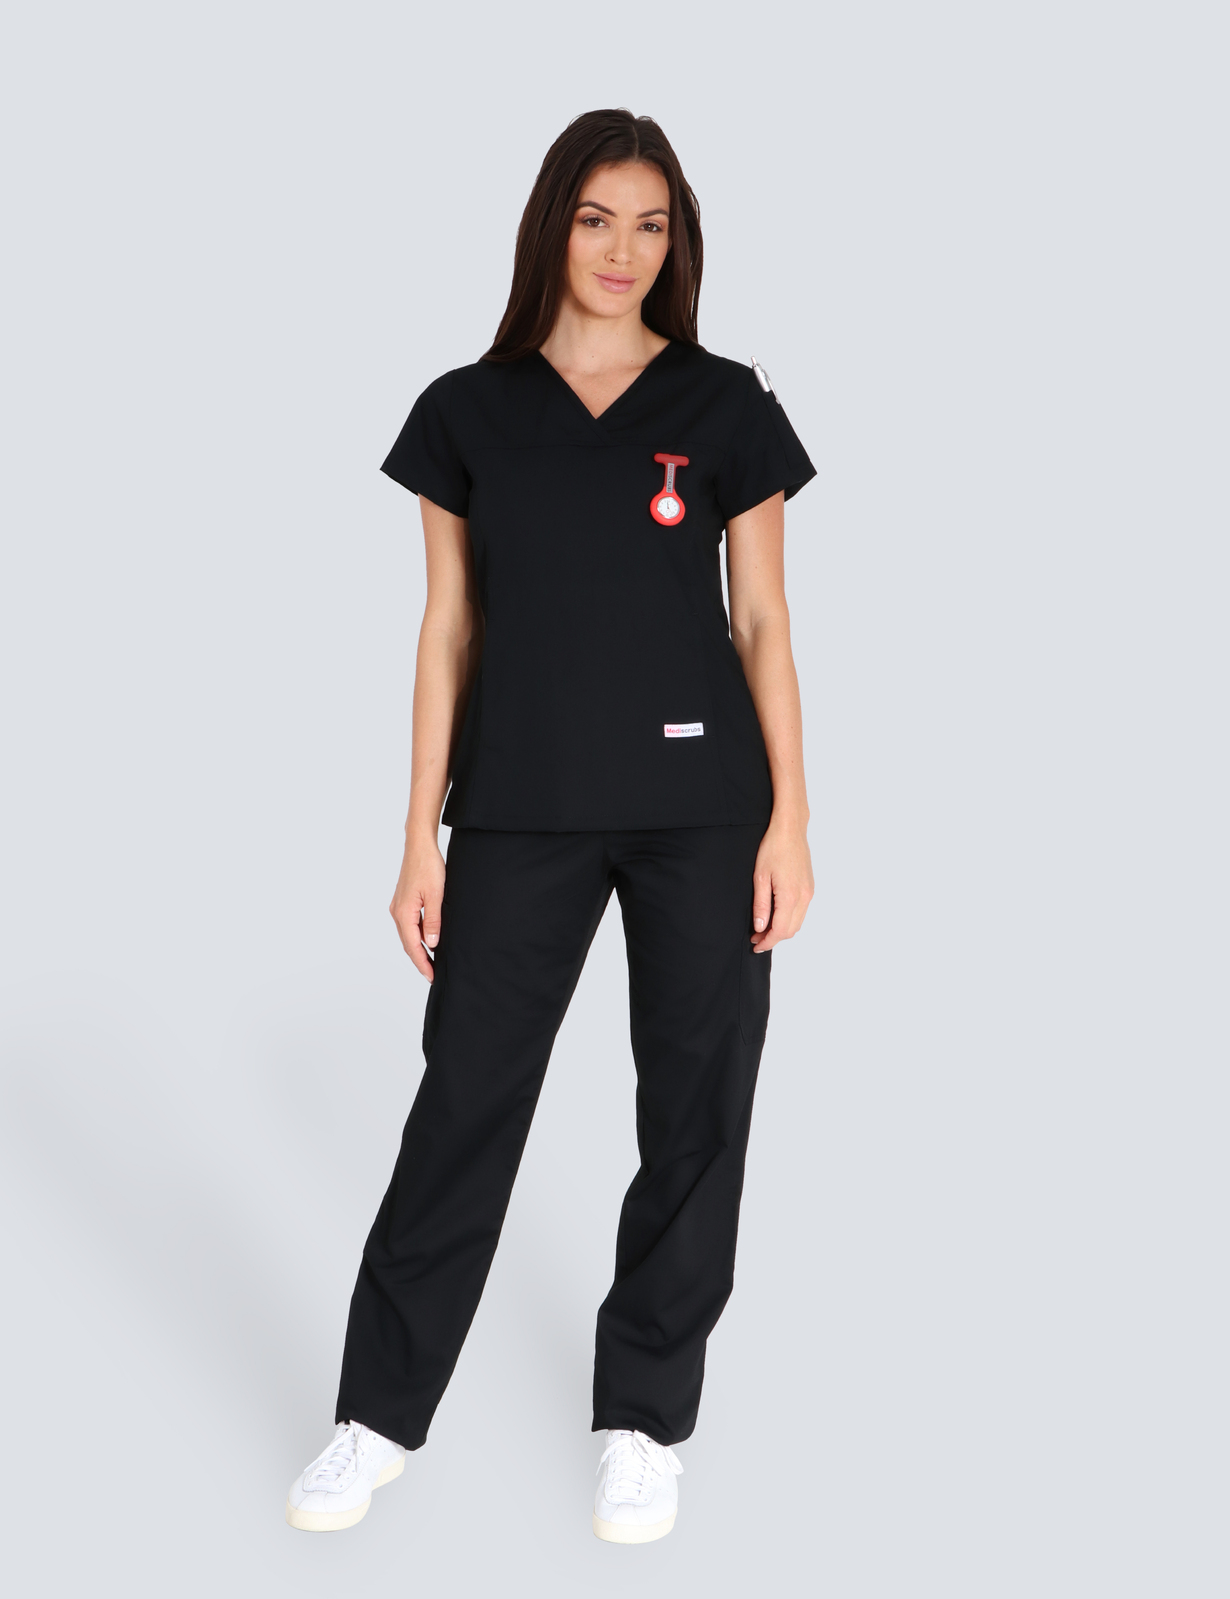 Prince Charles Hospital - Medical Imaging (Women's Fit Solid Top and Cargo Pants in Black incl Logos)